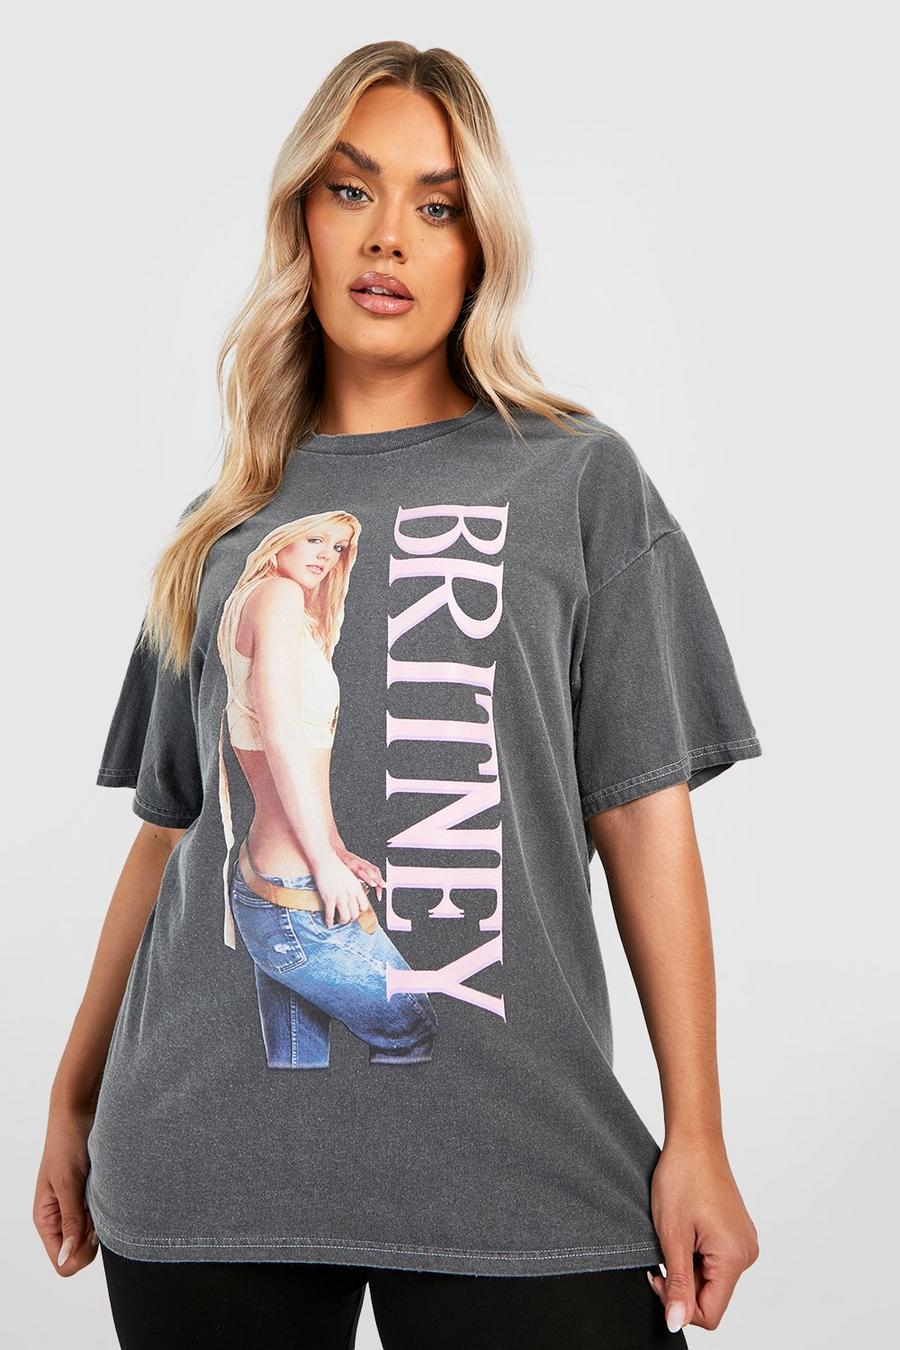 Charcoal Plus Britney Spears Licensed T-shirt image number 1